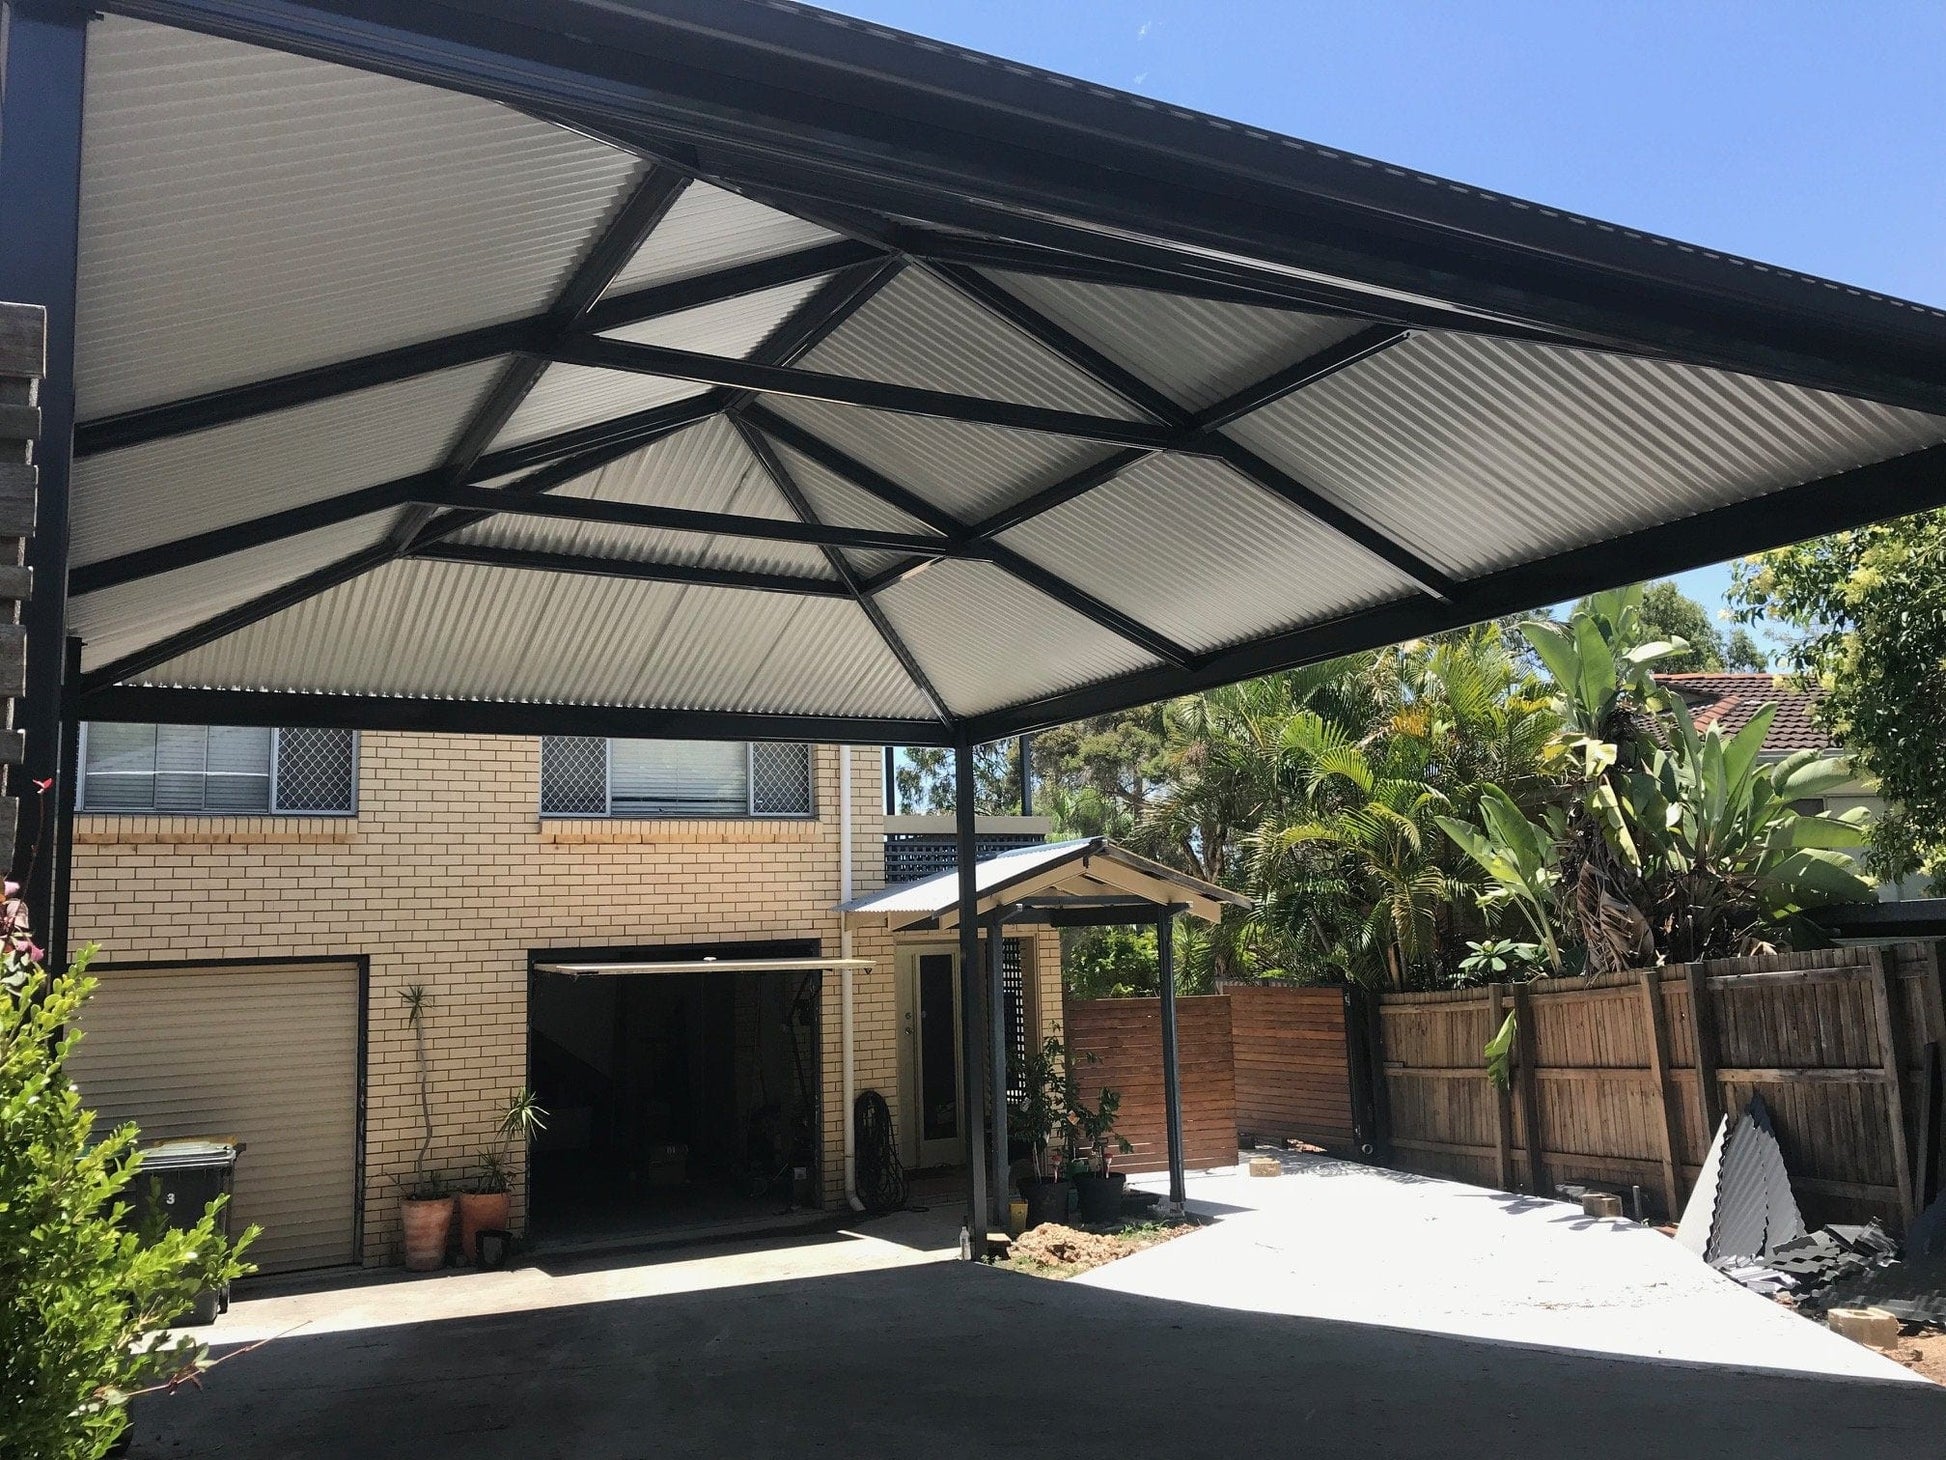 Insulated Gable Patio - 7m x 5m - Supply & Install QHI National